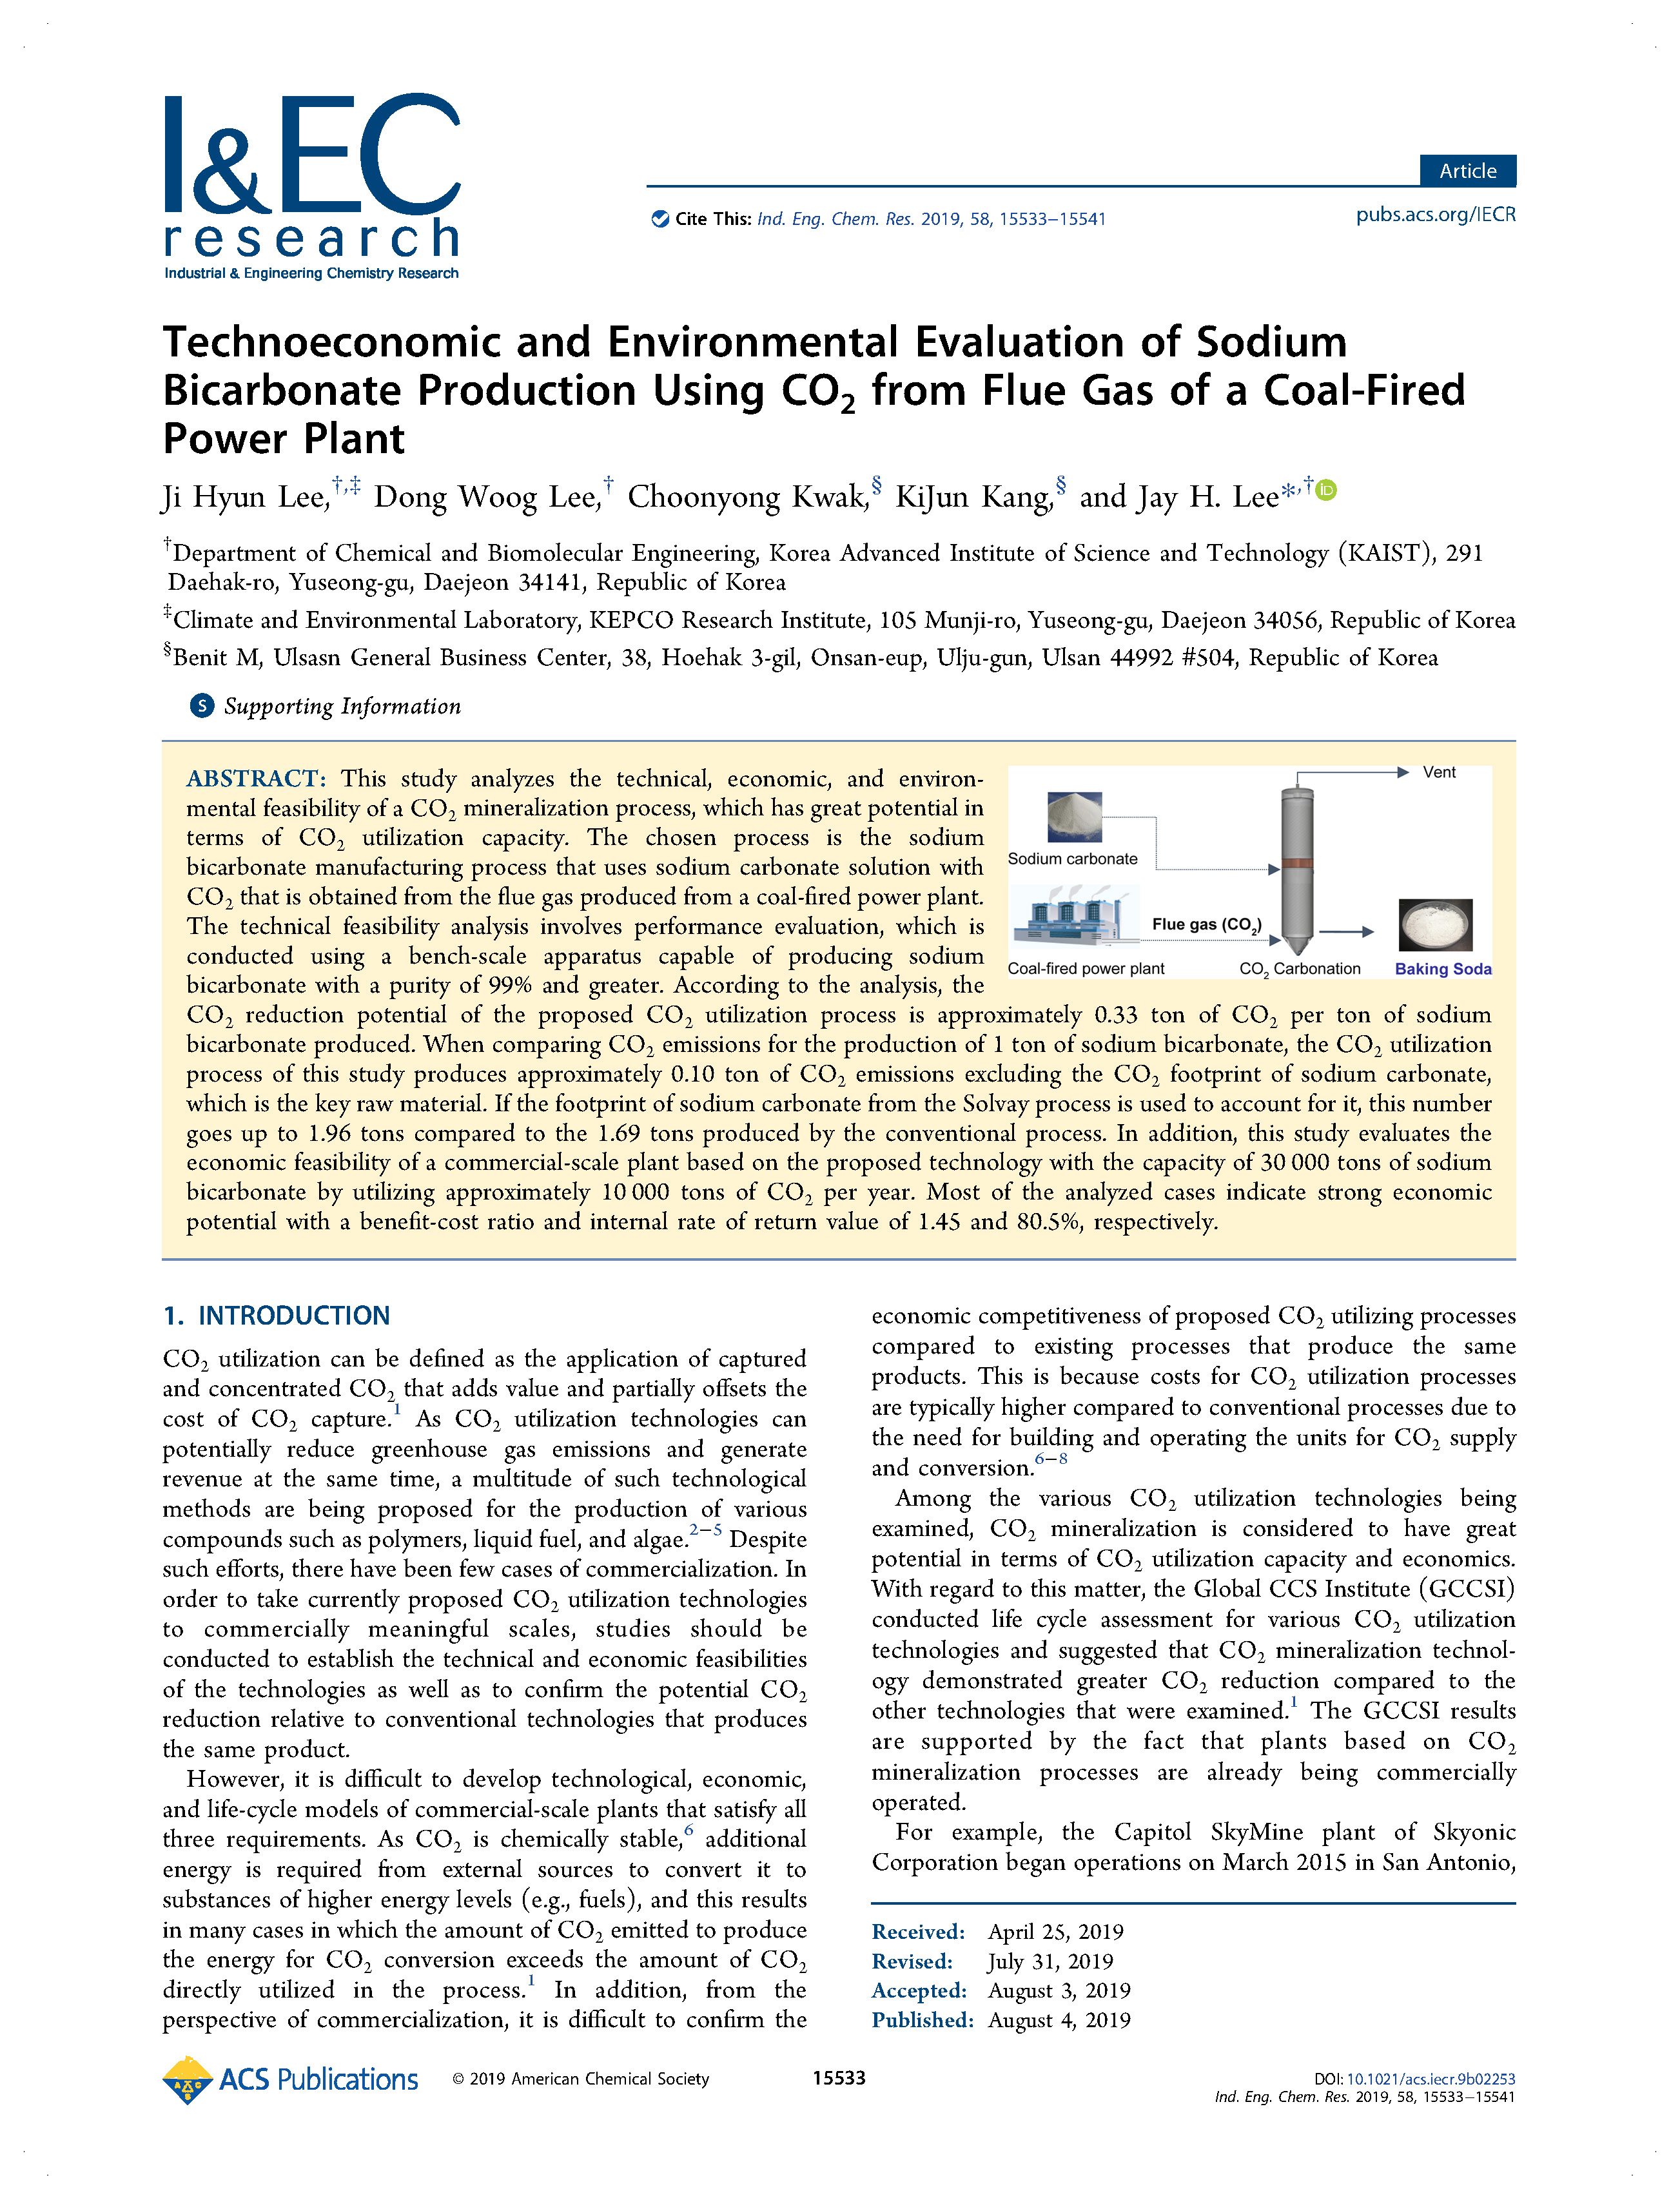 Technoeconomic and Environmental Evaluation of Sodium Bicarbonate Production Using CO2 from Flue Gas of a Coal-Fired Power Plant